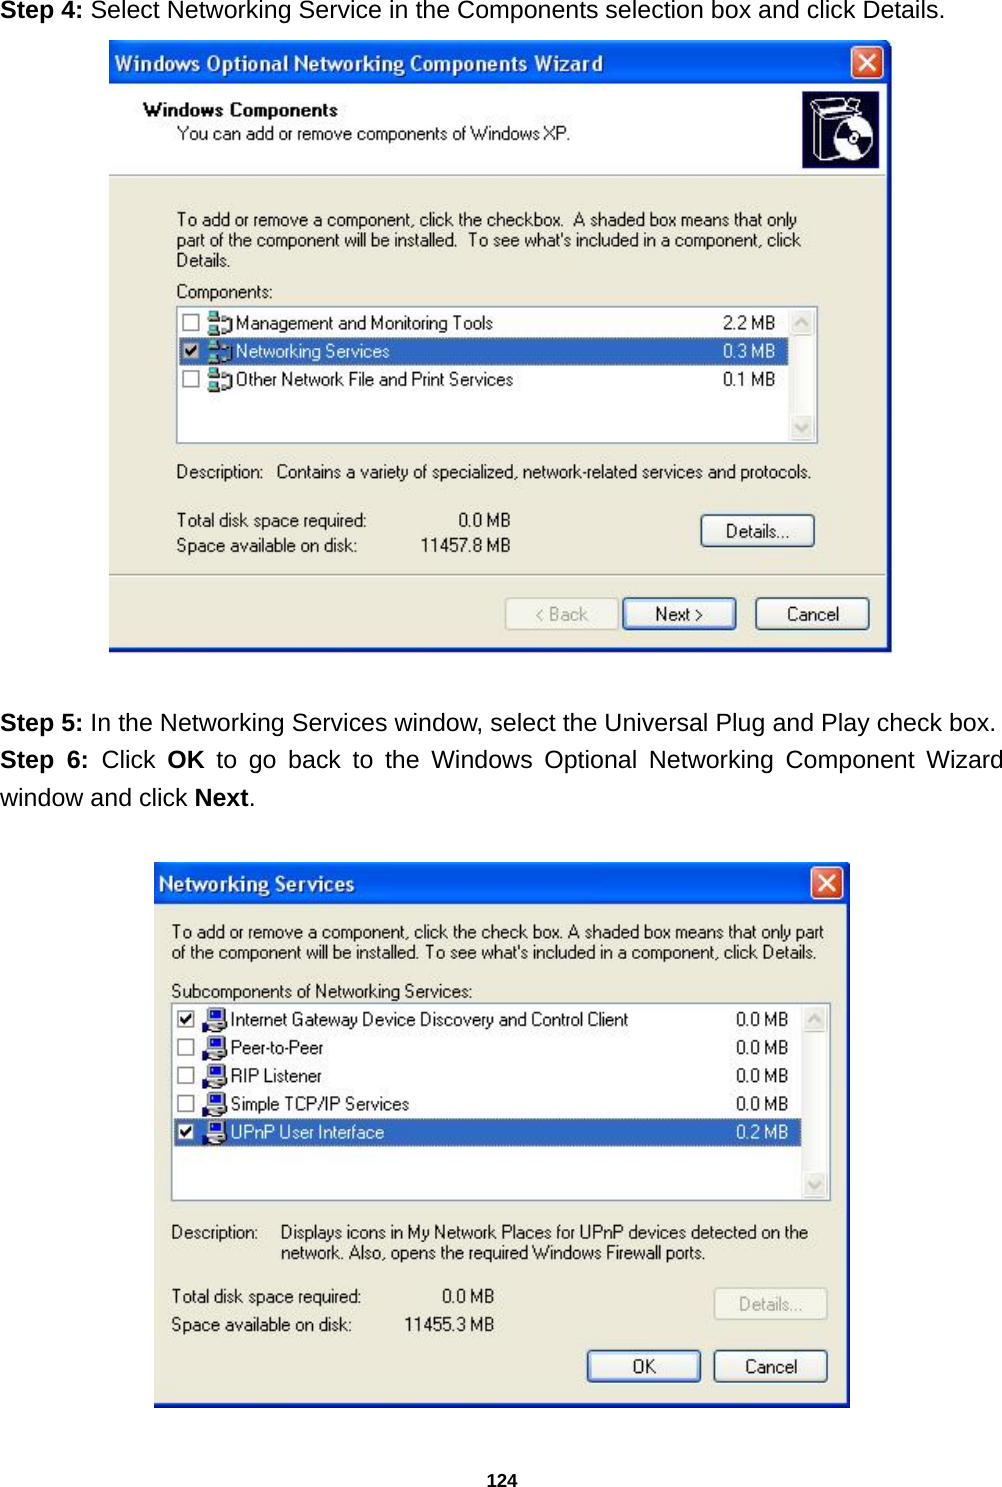 124 Step 4: Select Networking Service in the Components selection box and click Details.    Step 5: In the Networking Services window, select the Universal Plug and Play check box. Step 6: Click  OK to go back to the Windows Optional Networking Component Wizard window and click Next.    